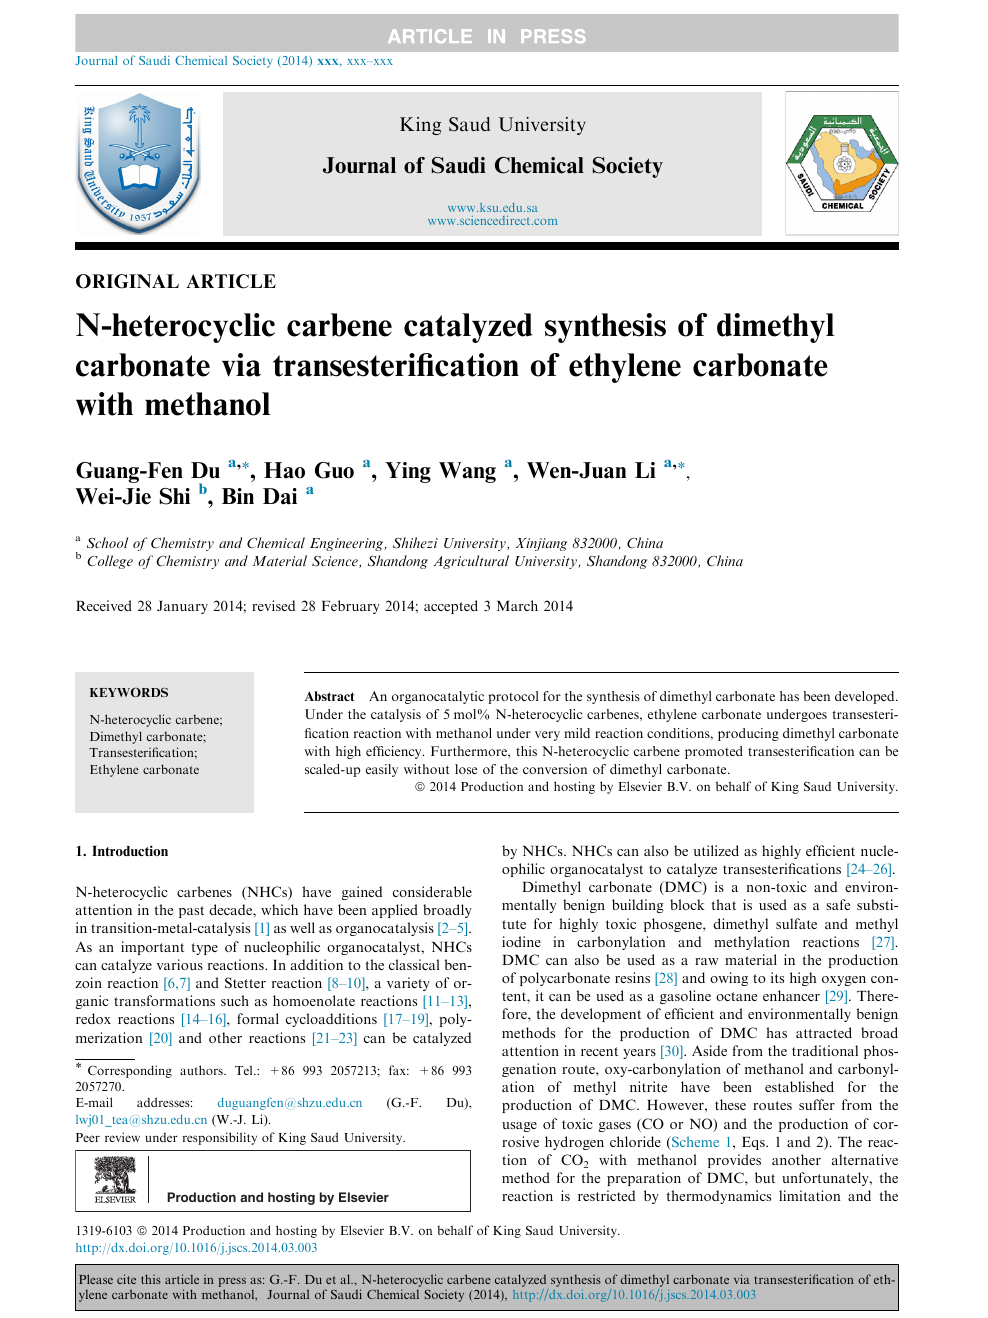 N Heterocyclic Carbene Catalyzed Synthesis Of Dimethyl Carbonate Via Transesterification Of Ethylene Carbonate With Methanol Topic Of Research Paper In Chemical Sciences Download Scholarly Article Pdf And Read For Free On Cyberleninka